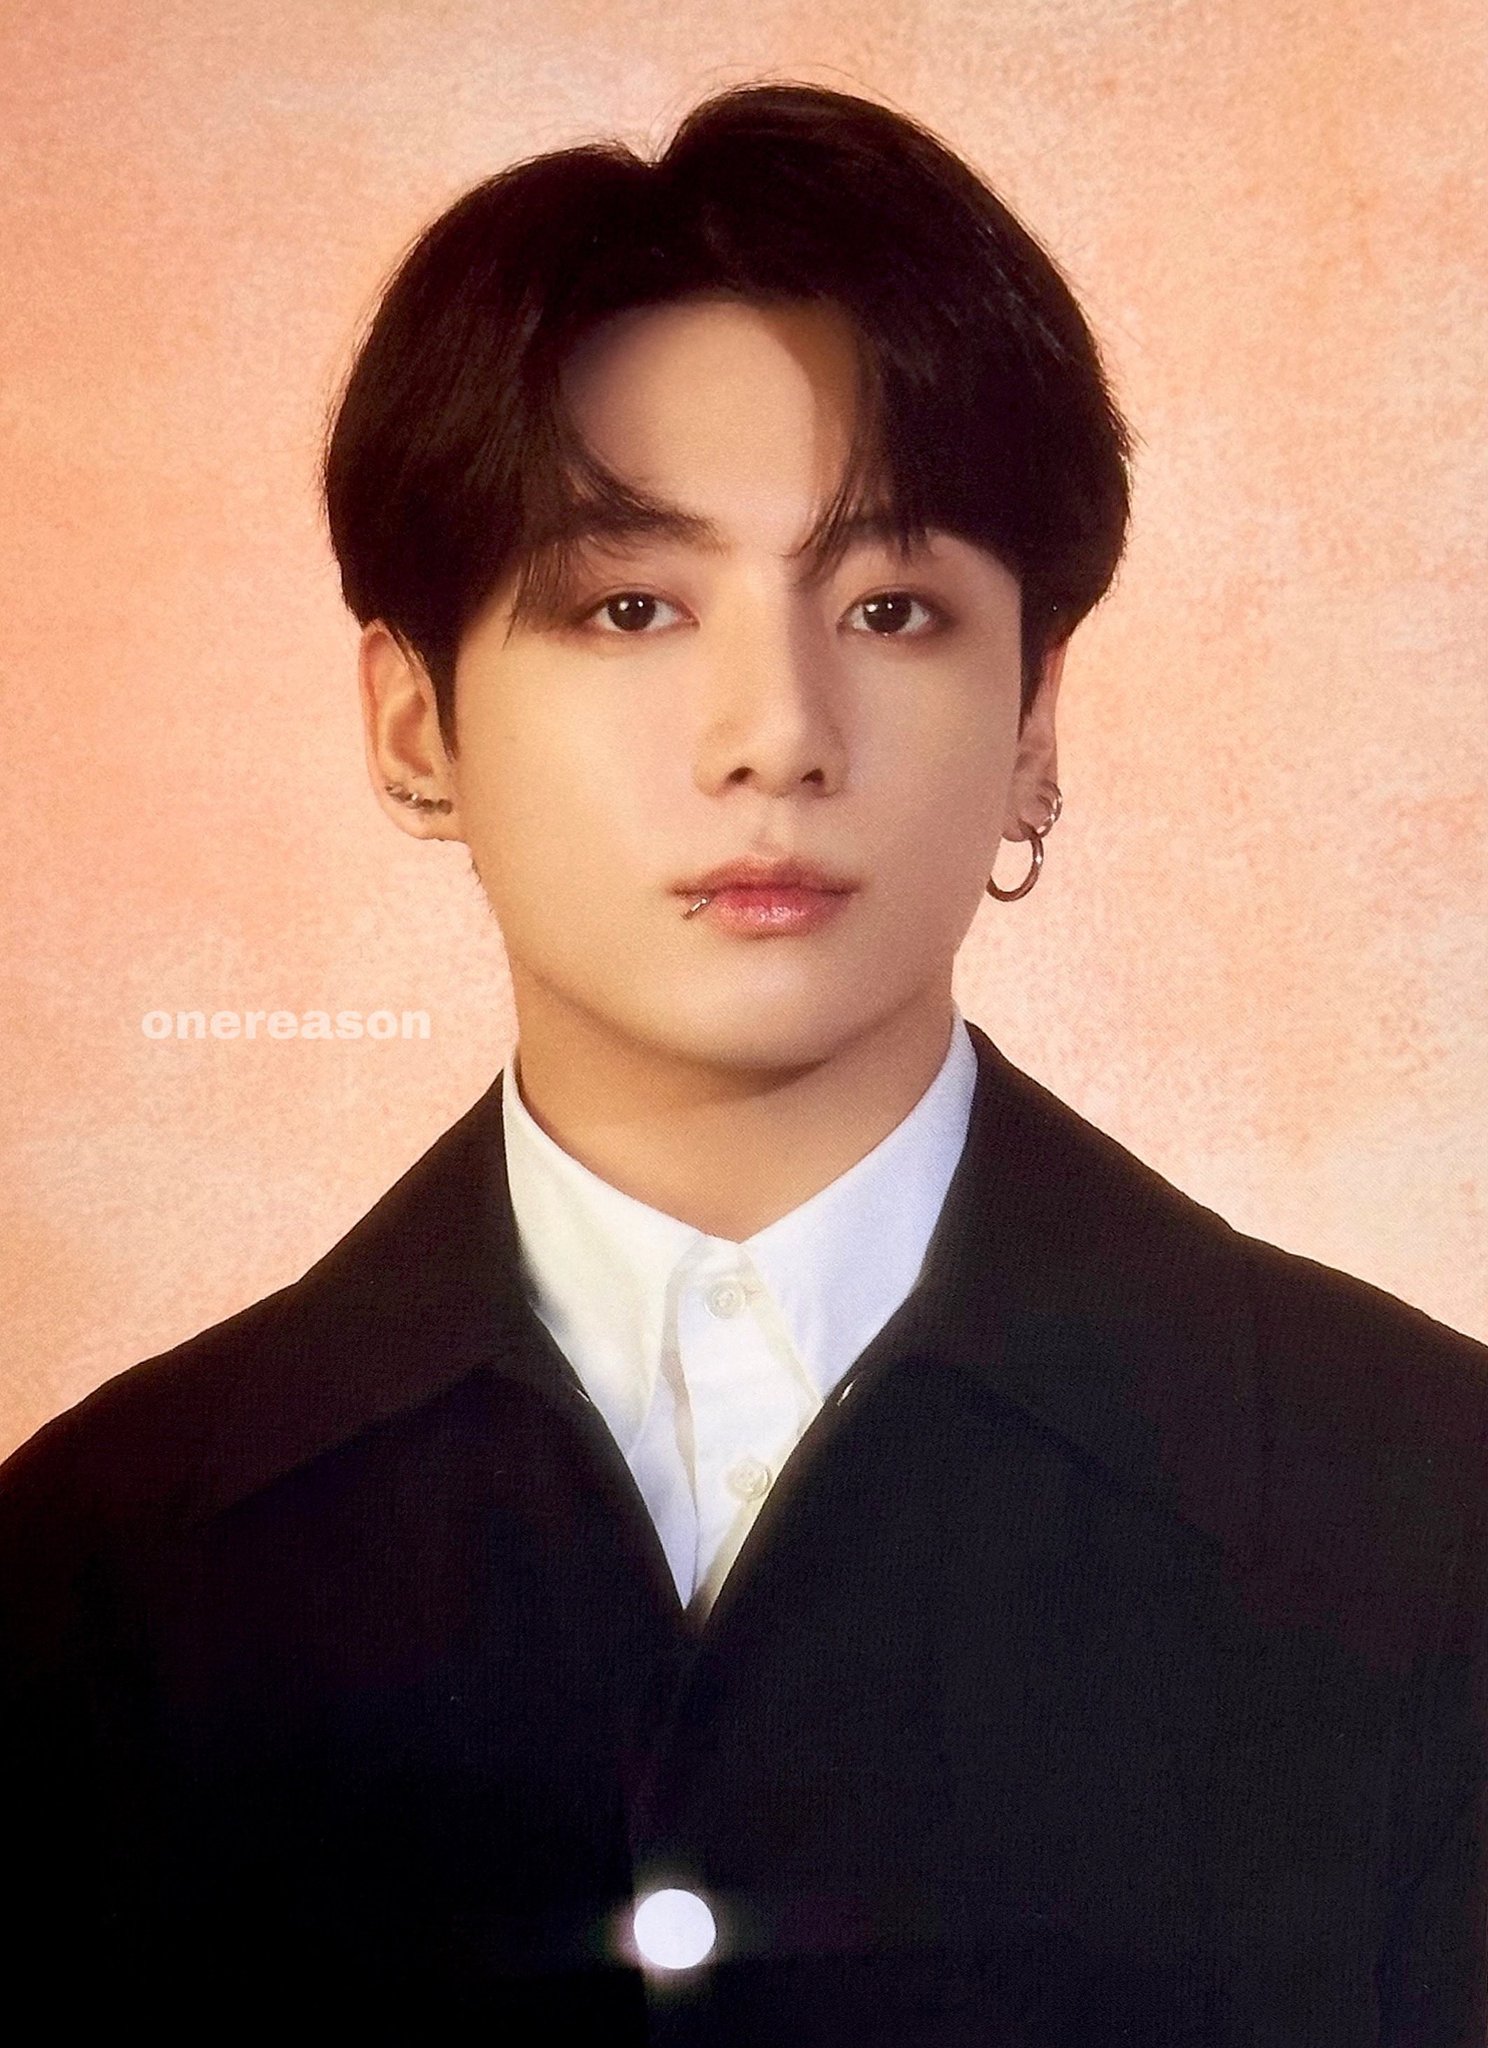 JKz BAE³ᴰ on X: RT + REPLY ♡ I vote #JUNGKOOK for Most Handsome